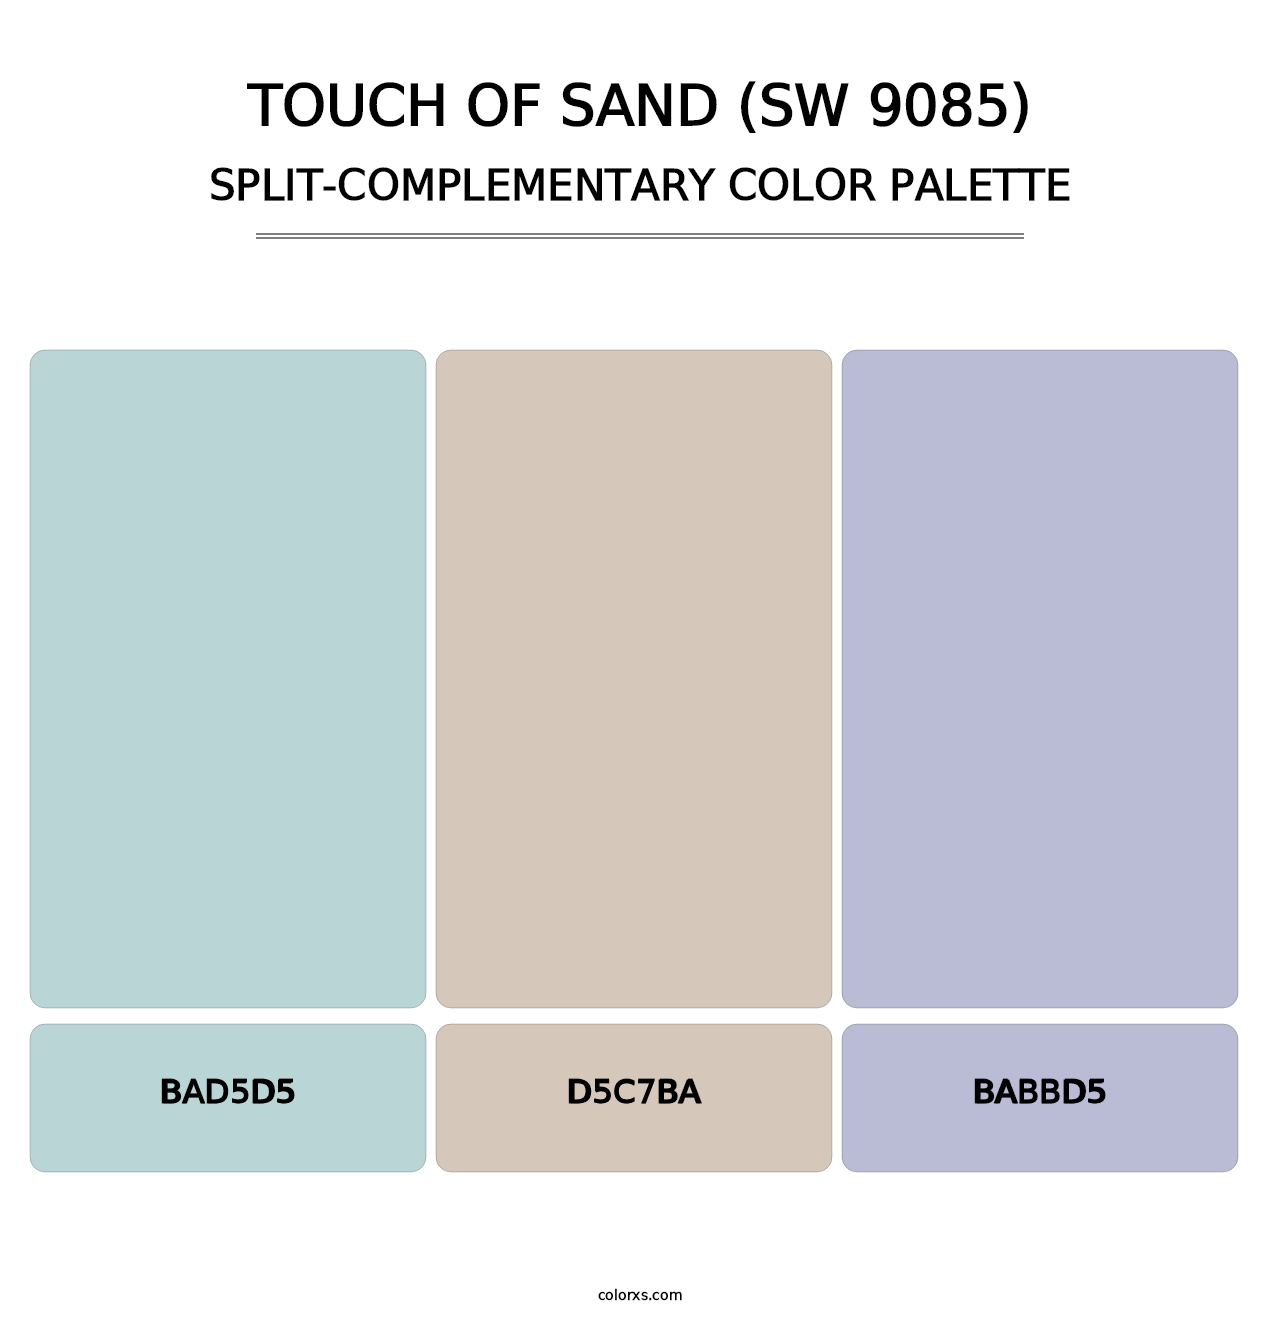 Touch of Sand (SW 9085) - Split-Complementary Color Palette